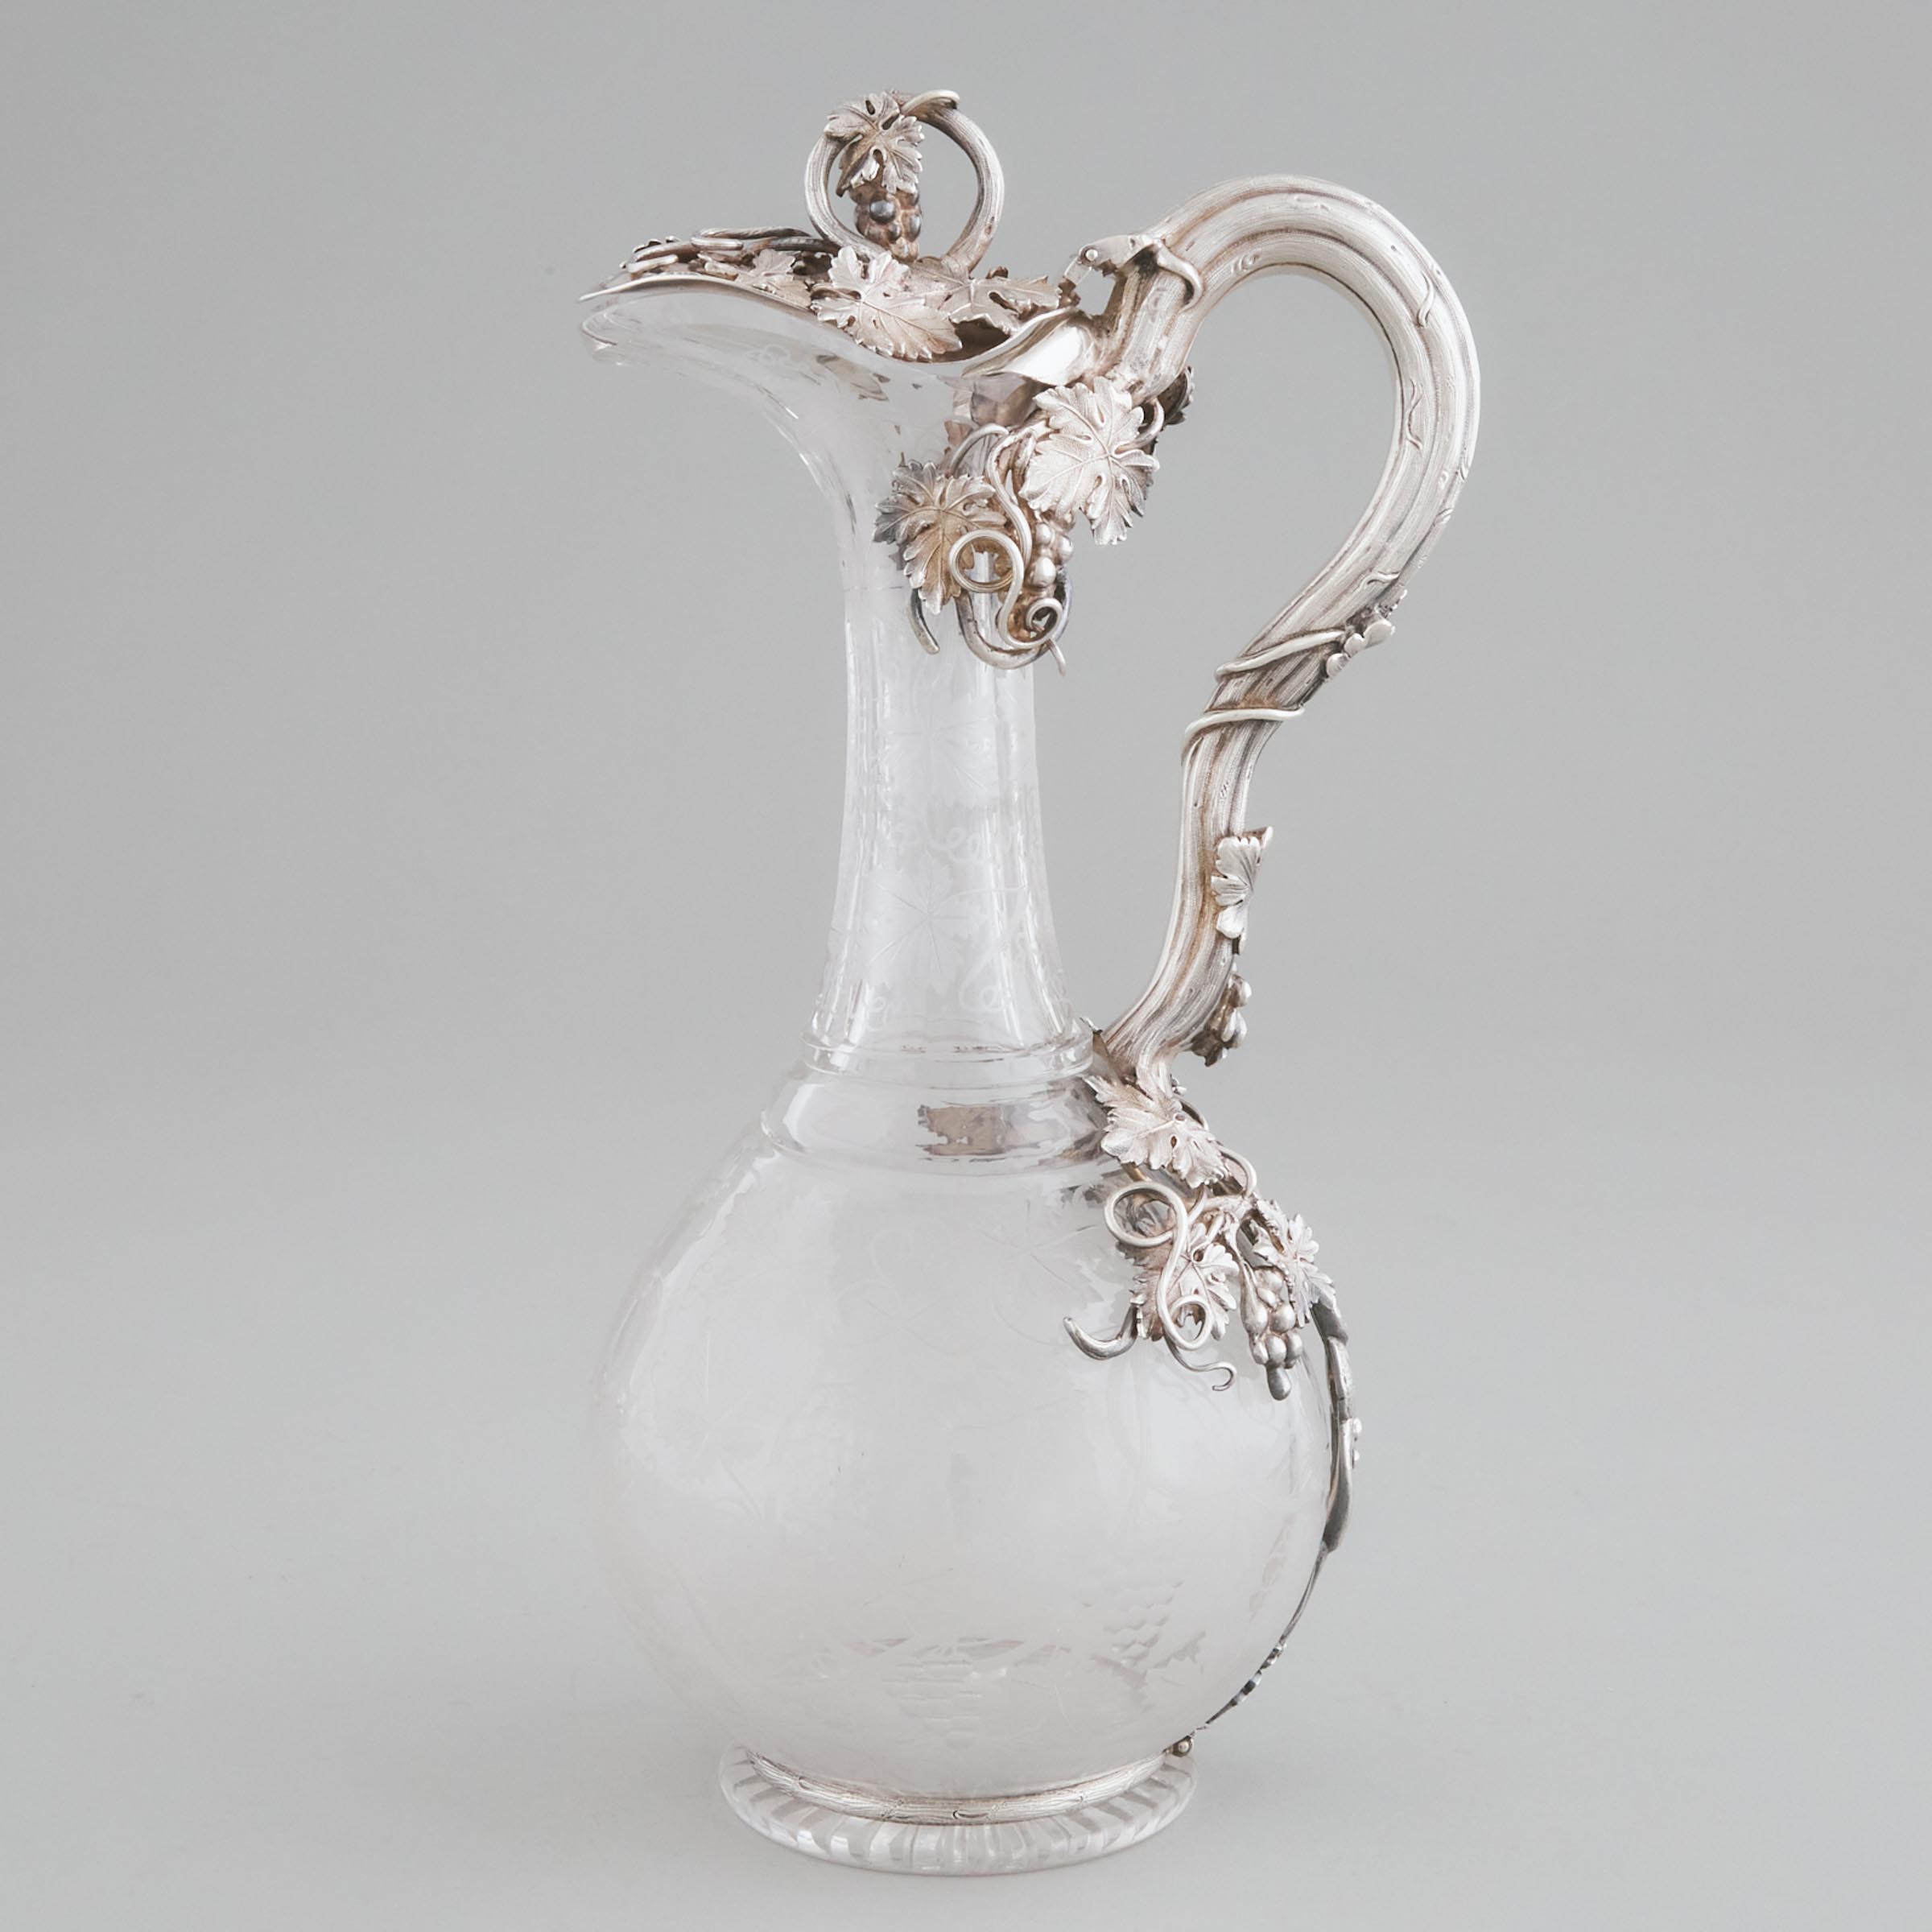 Victorian Silver Mounted Cut and Etched Glass Claret Jug, Robert Garrard, London, 1846